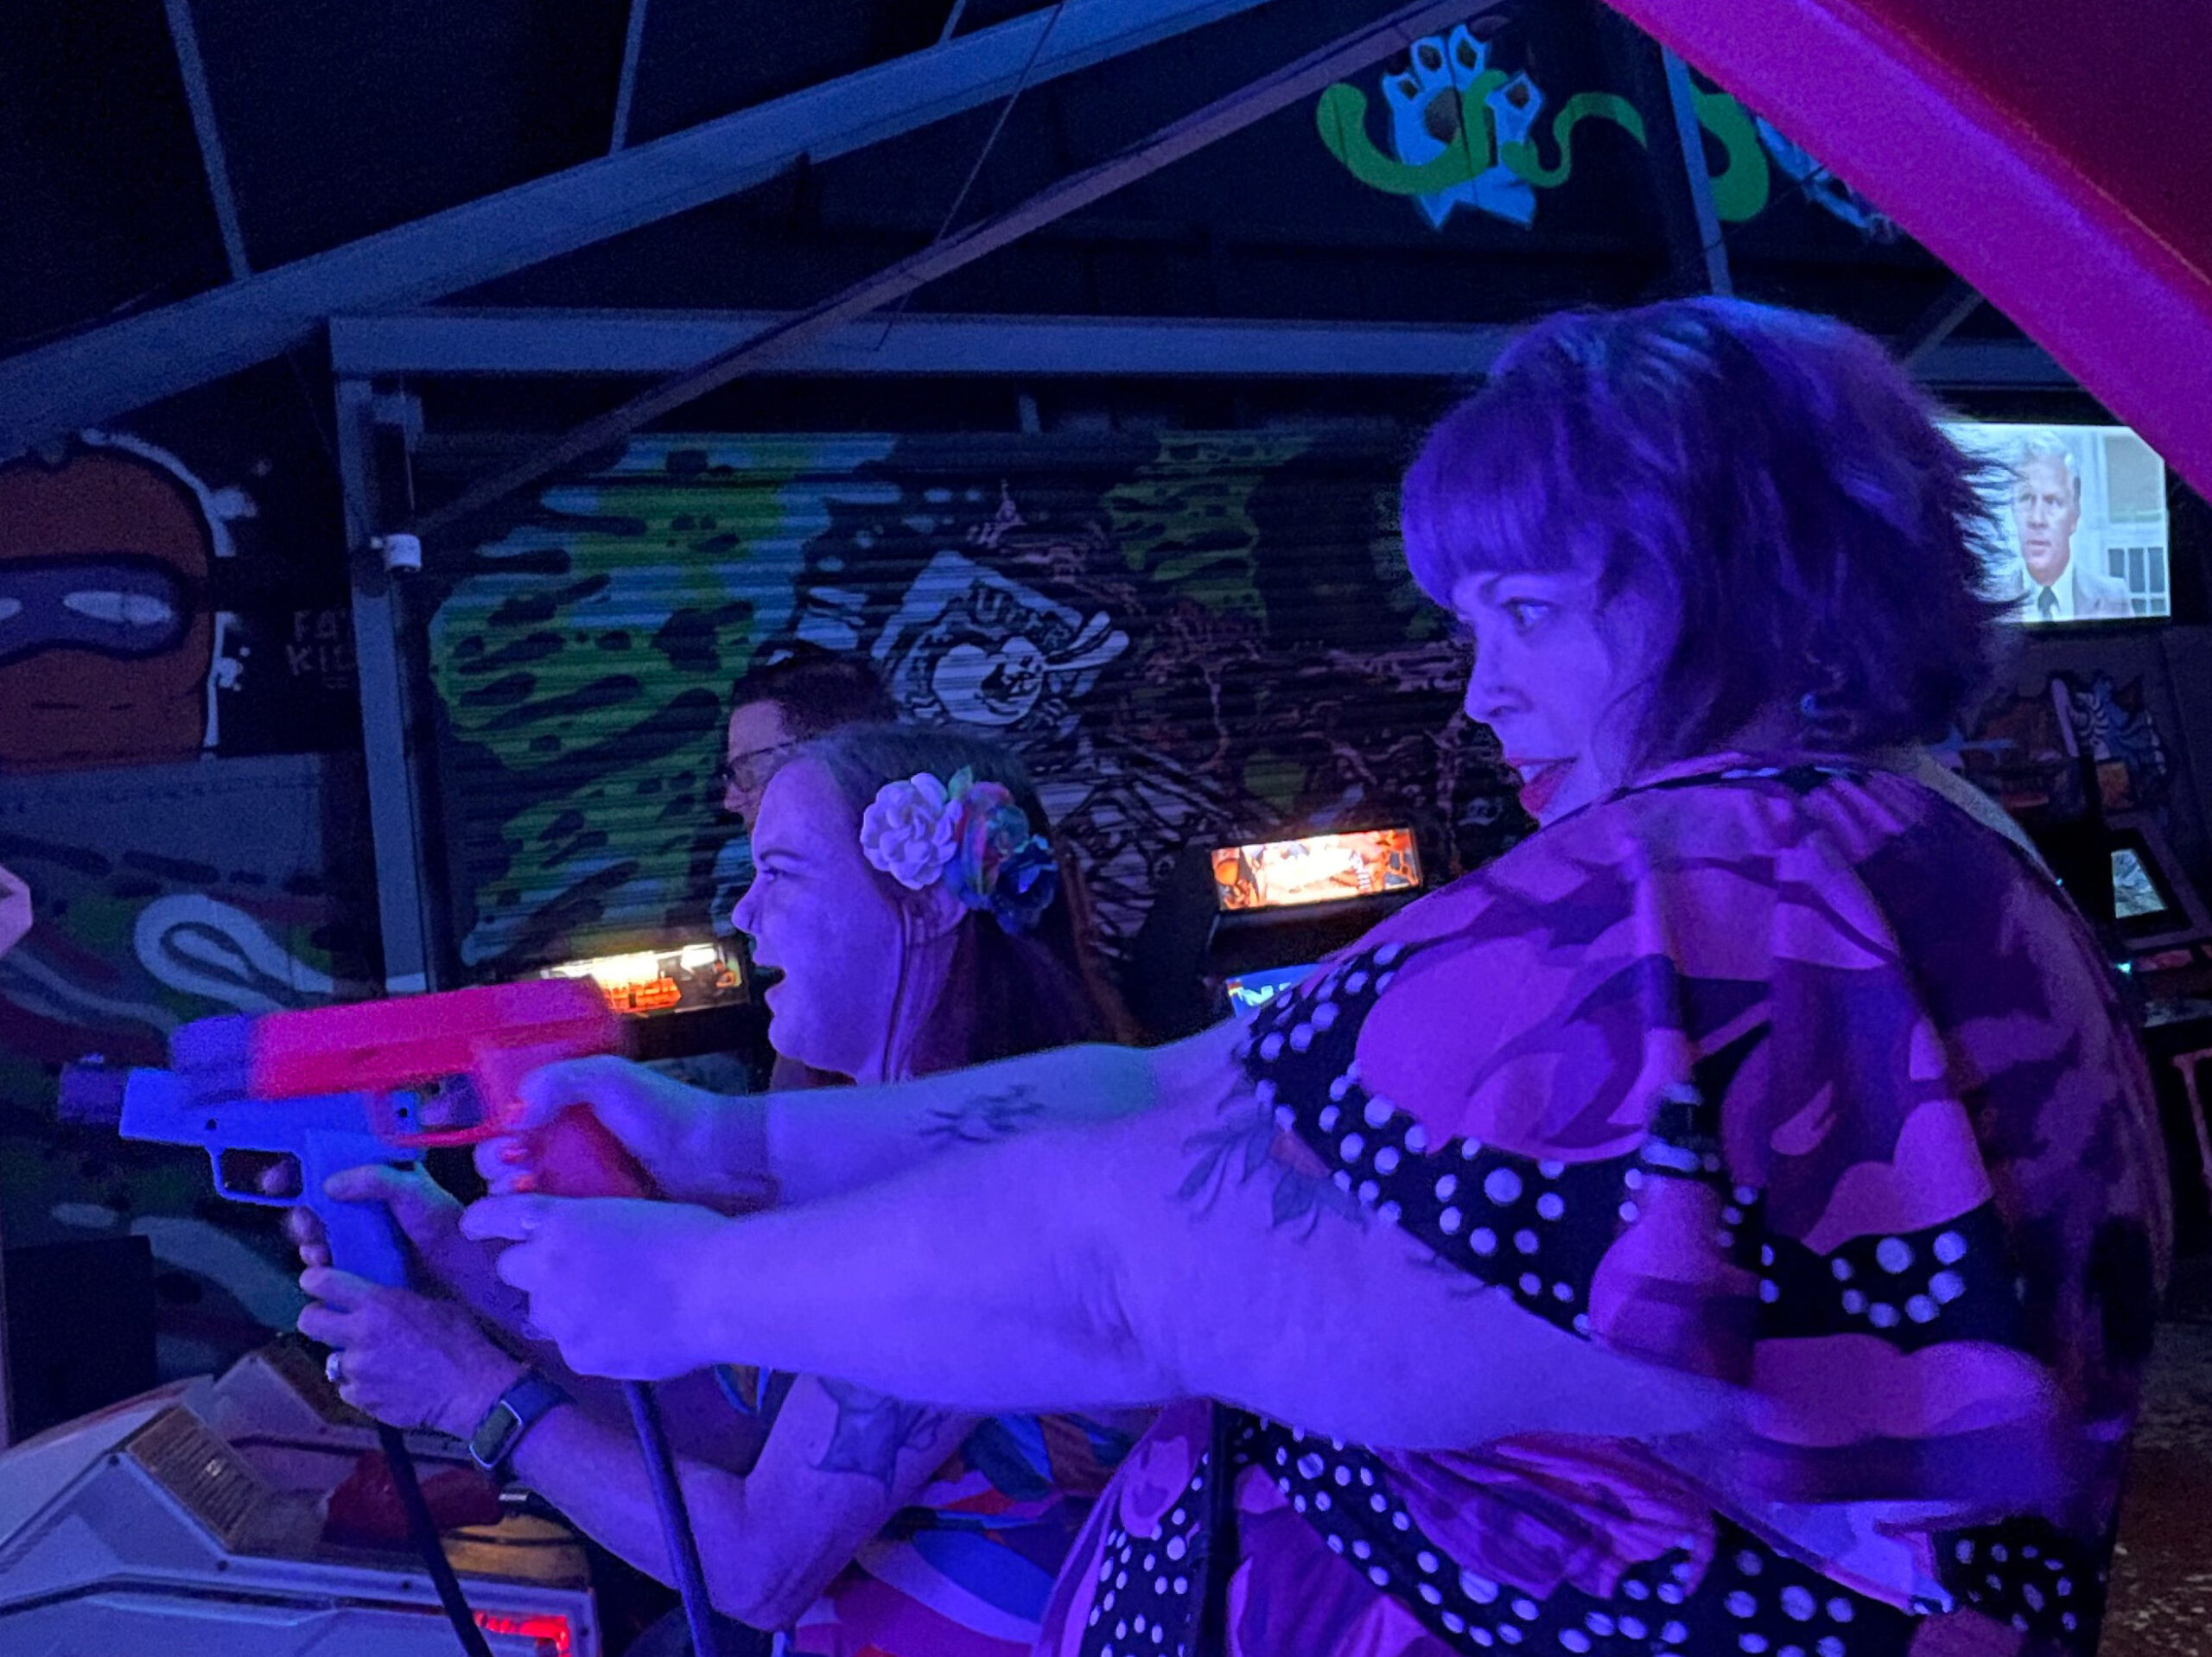 Two women bathed in blue light at a arcade, holding red and blue guns and playing a shooting game.